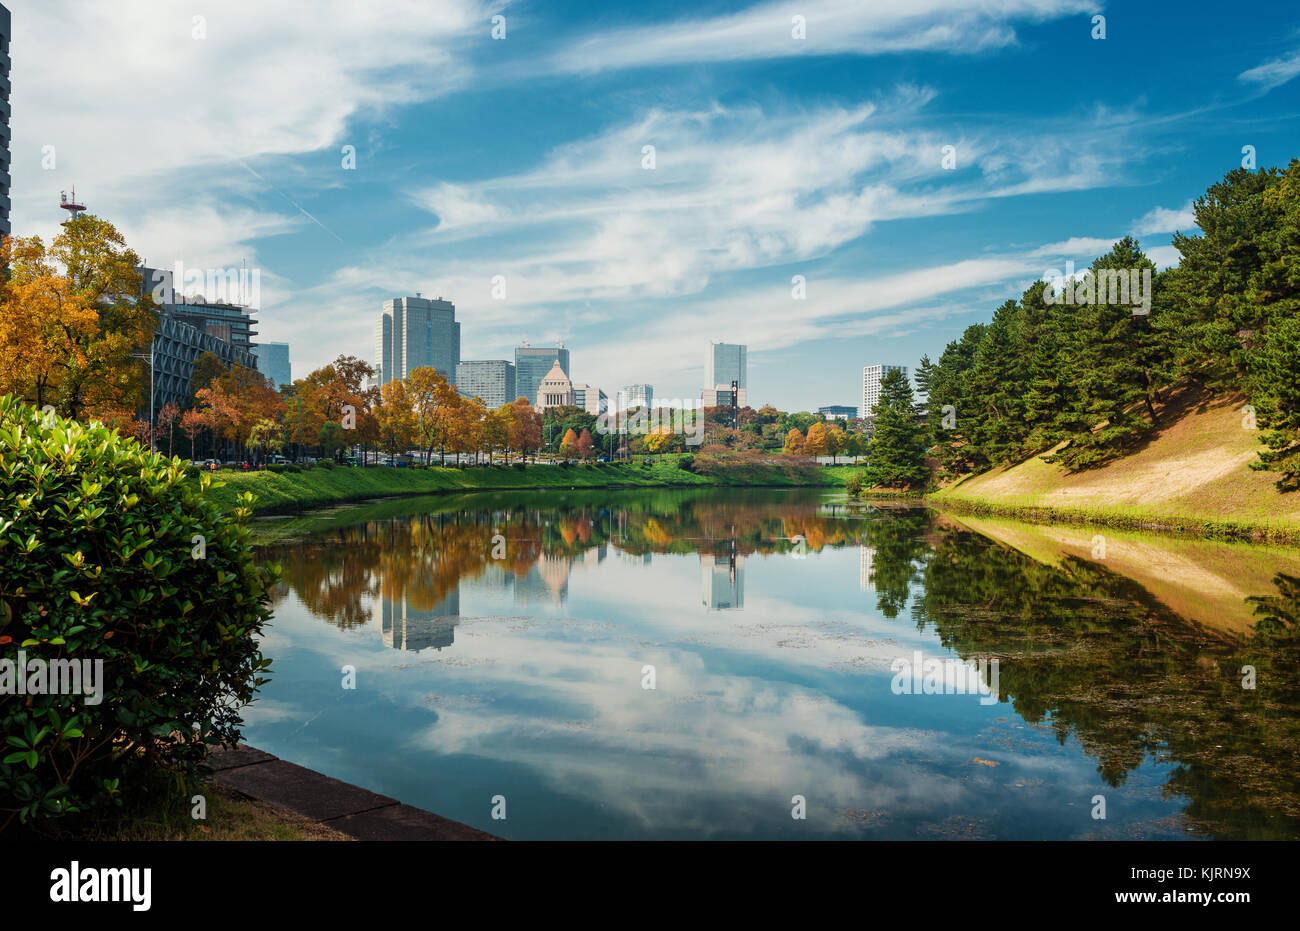 View of the Tokyo city center from the Imperial Palace public gardens ancient moat in autumn Stock Photo